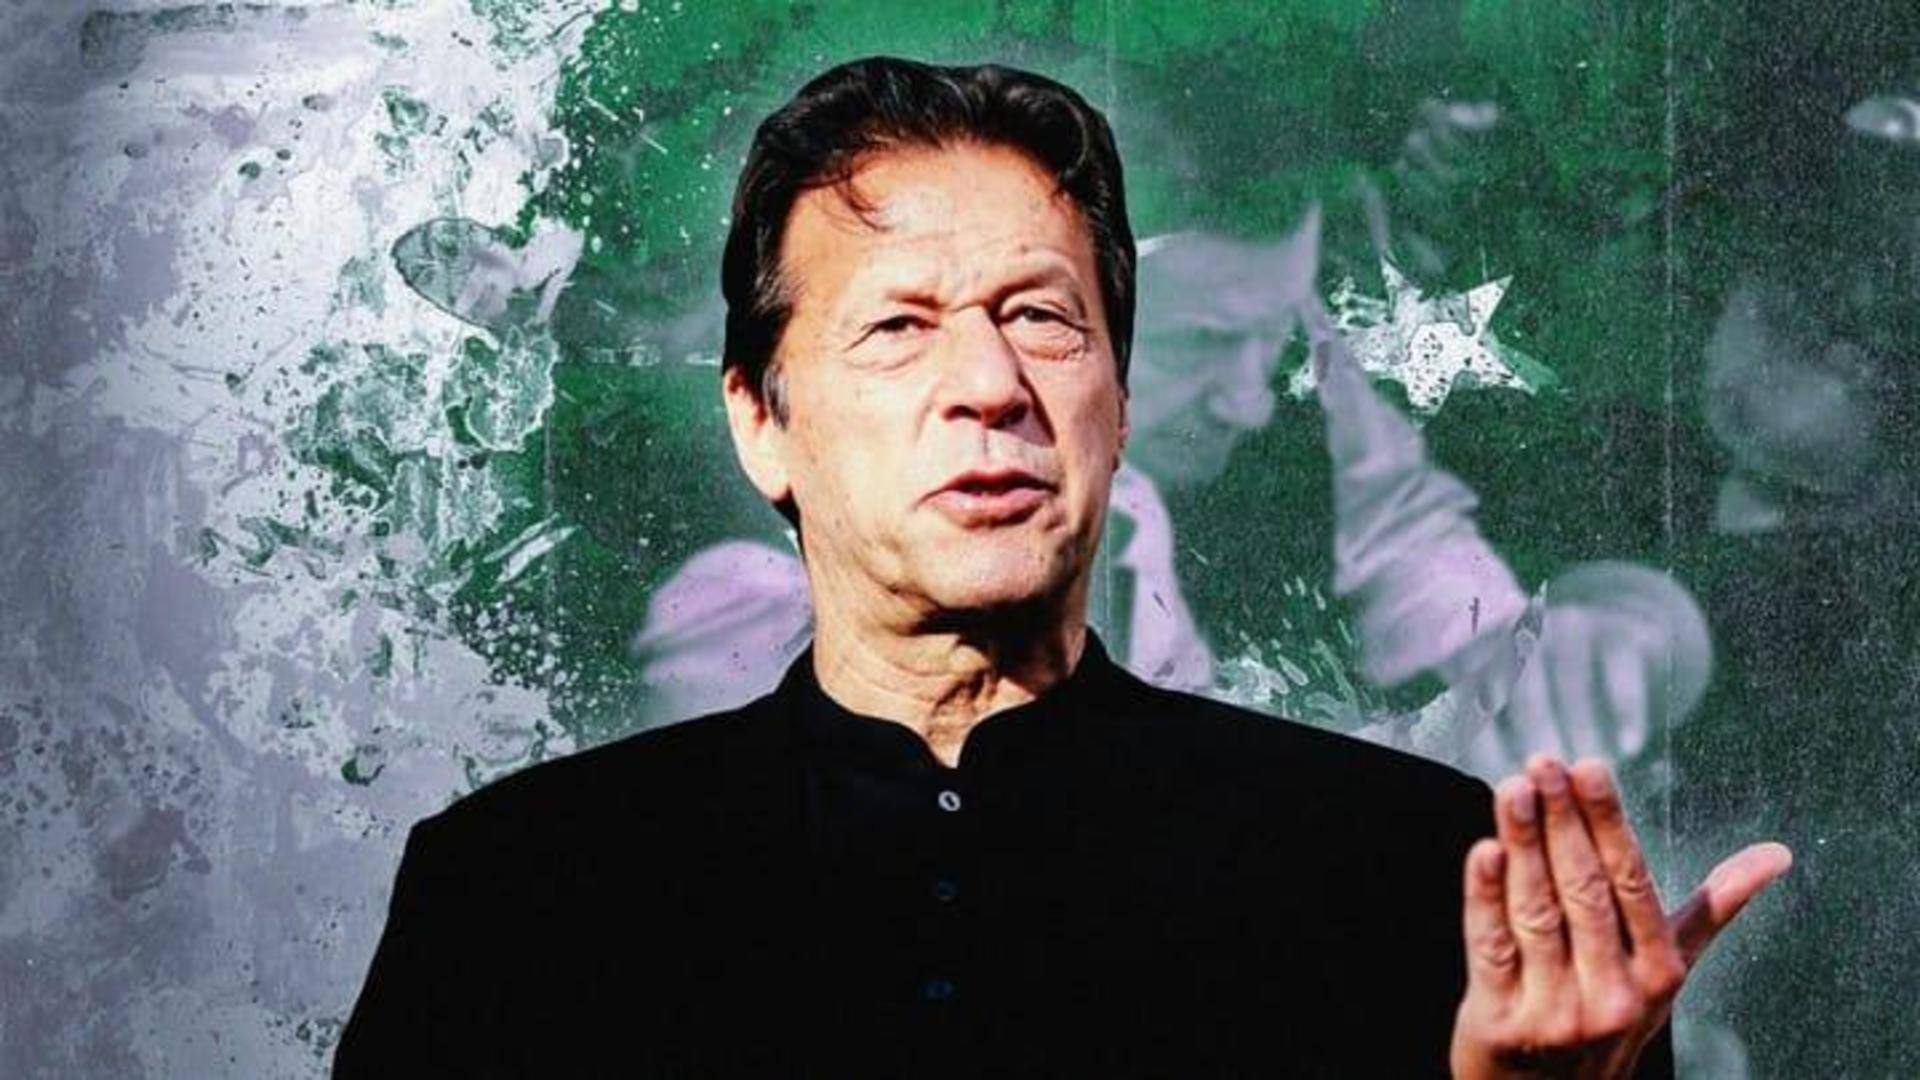 Pakistan's Imran Khan booked for attack on army headquarters: Report